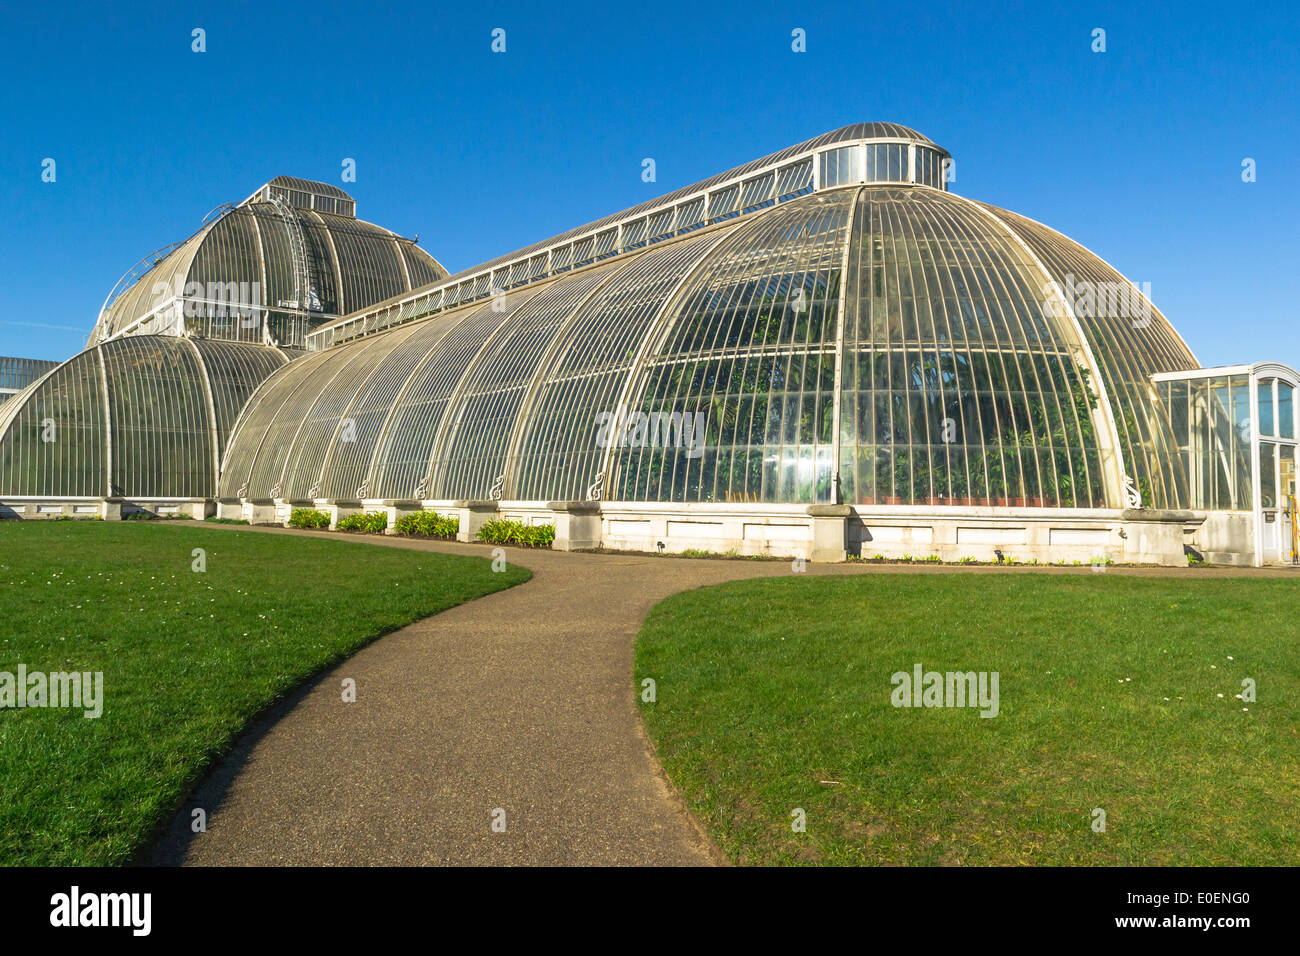 The  Glass house of Kew Garden, the famous botanical Herbarium in London, UK Stock Photo